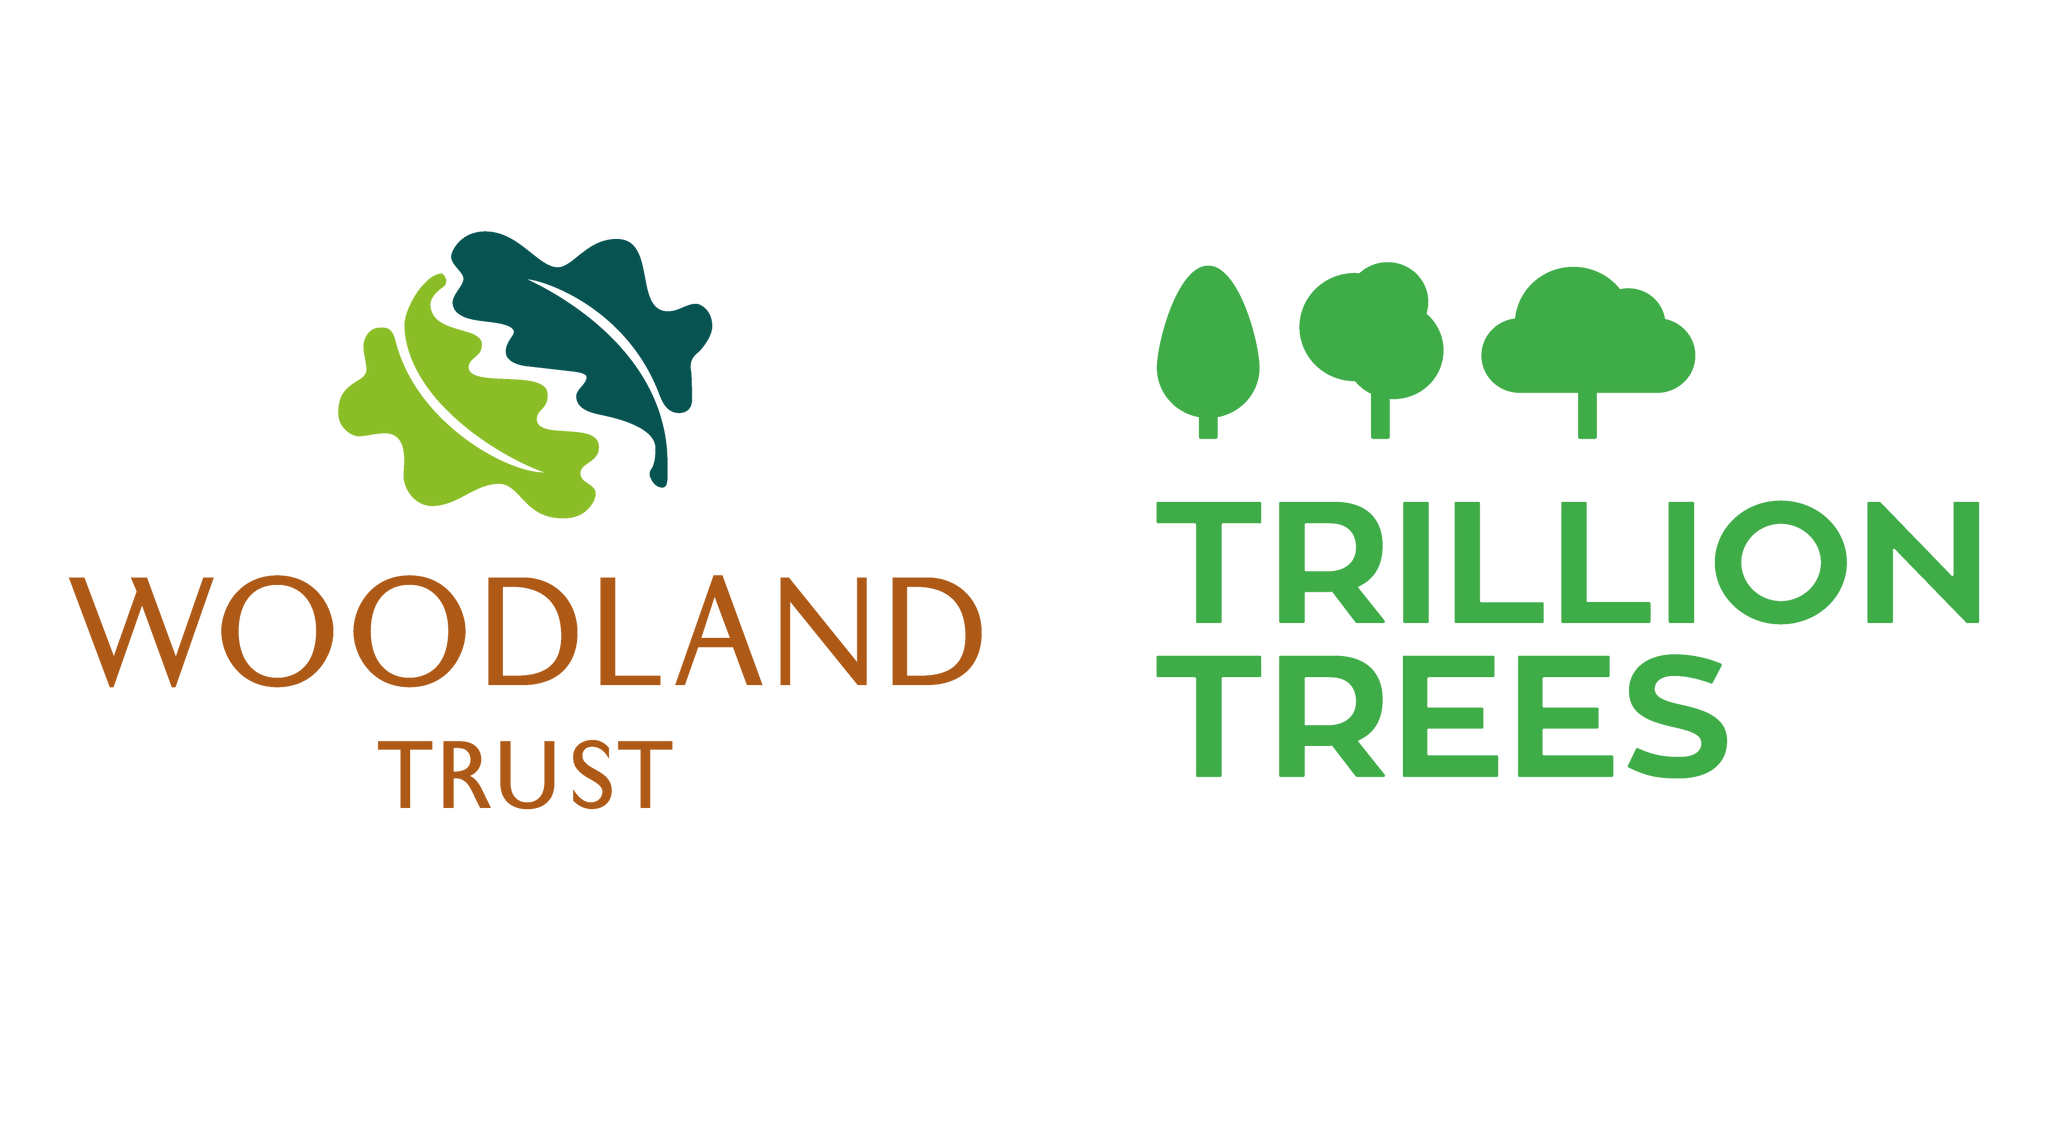 image showing two logos for the Woodland Trust and Trillion Trees, which are the two charities that Four twentea donate 10% of profits to.